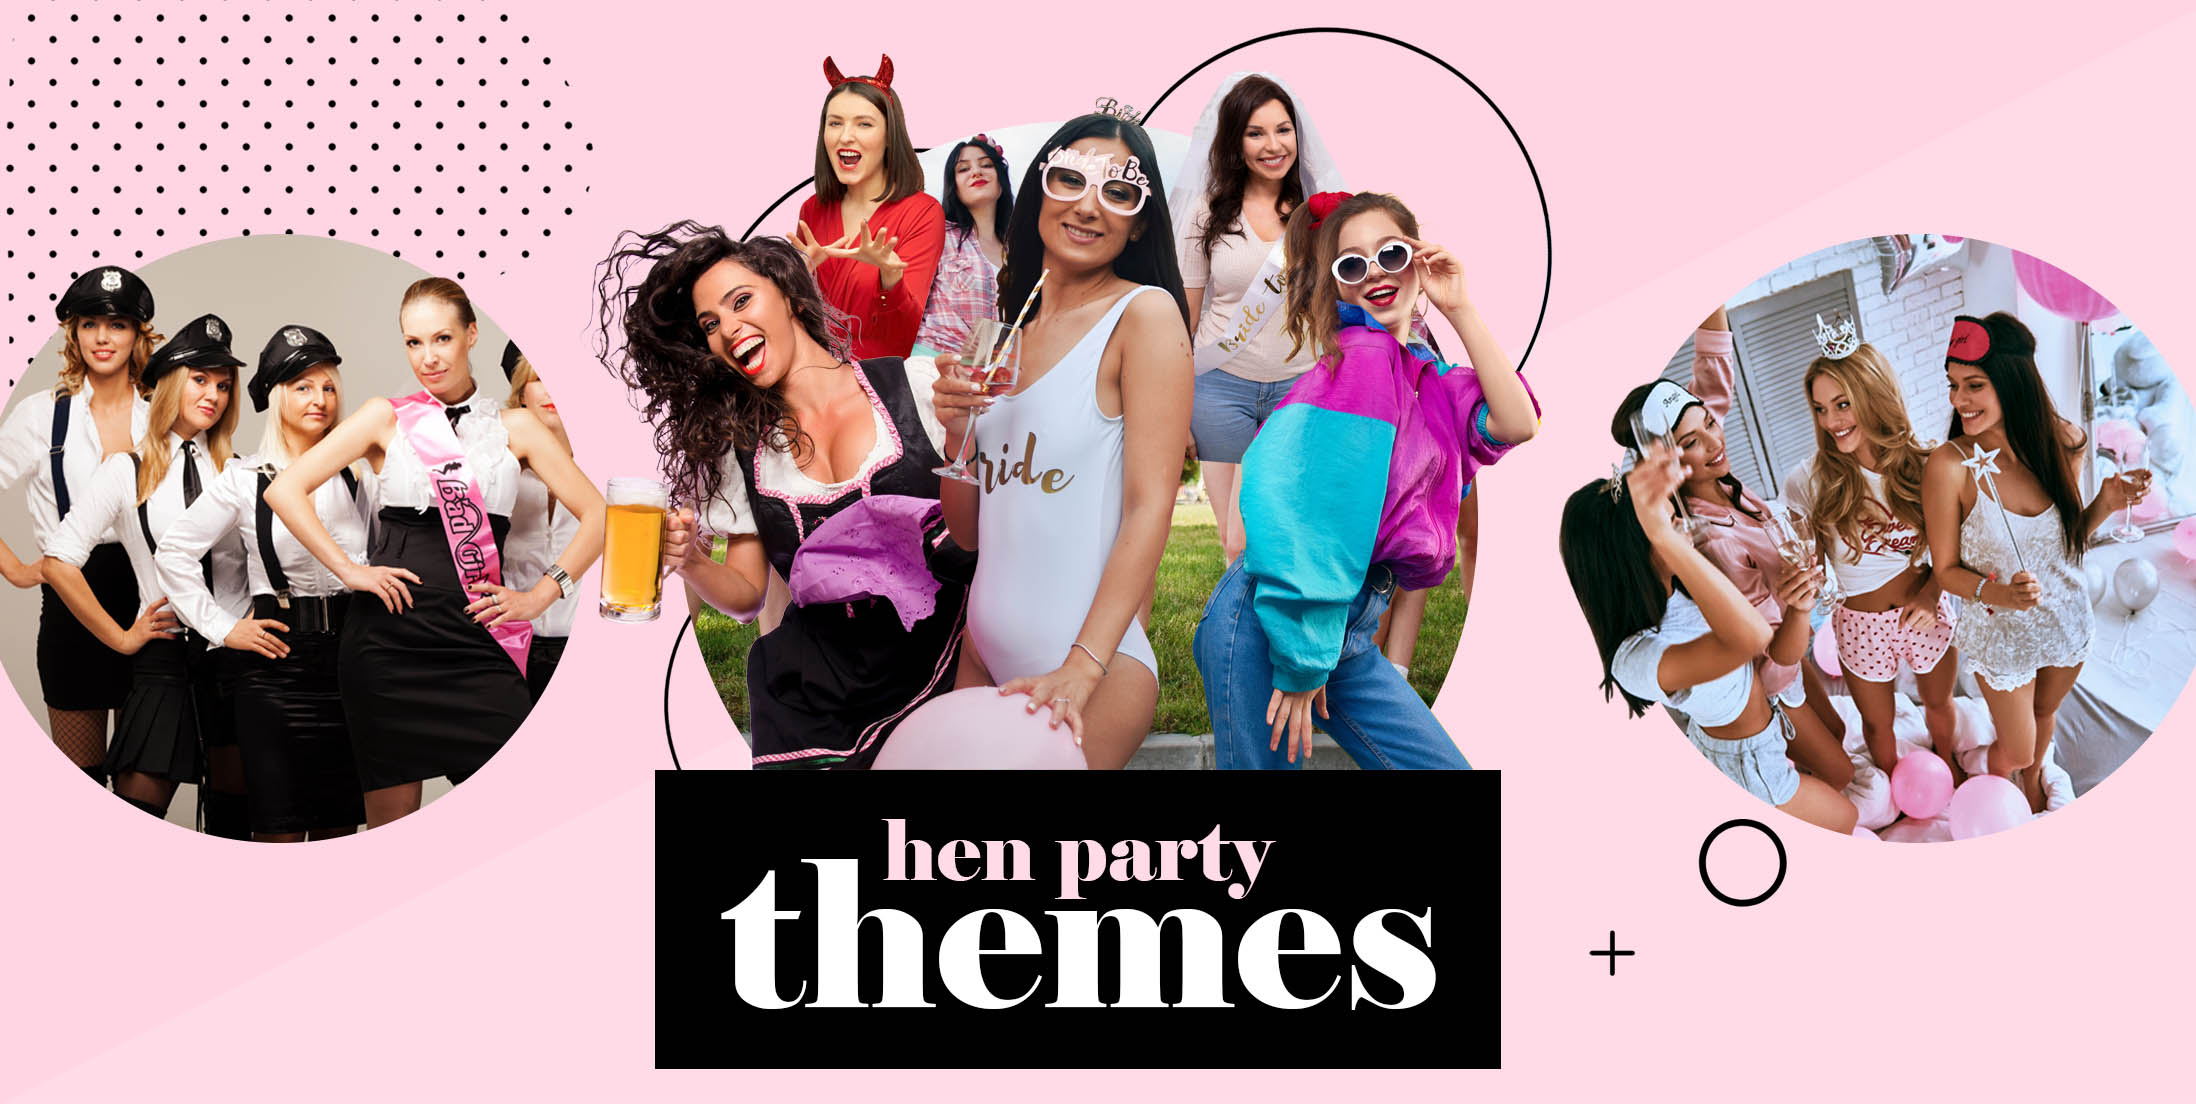 Hen Party Themes by Life Drawing Hen Parties